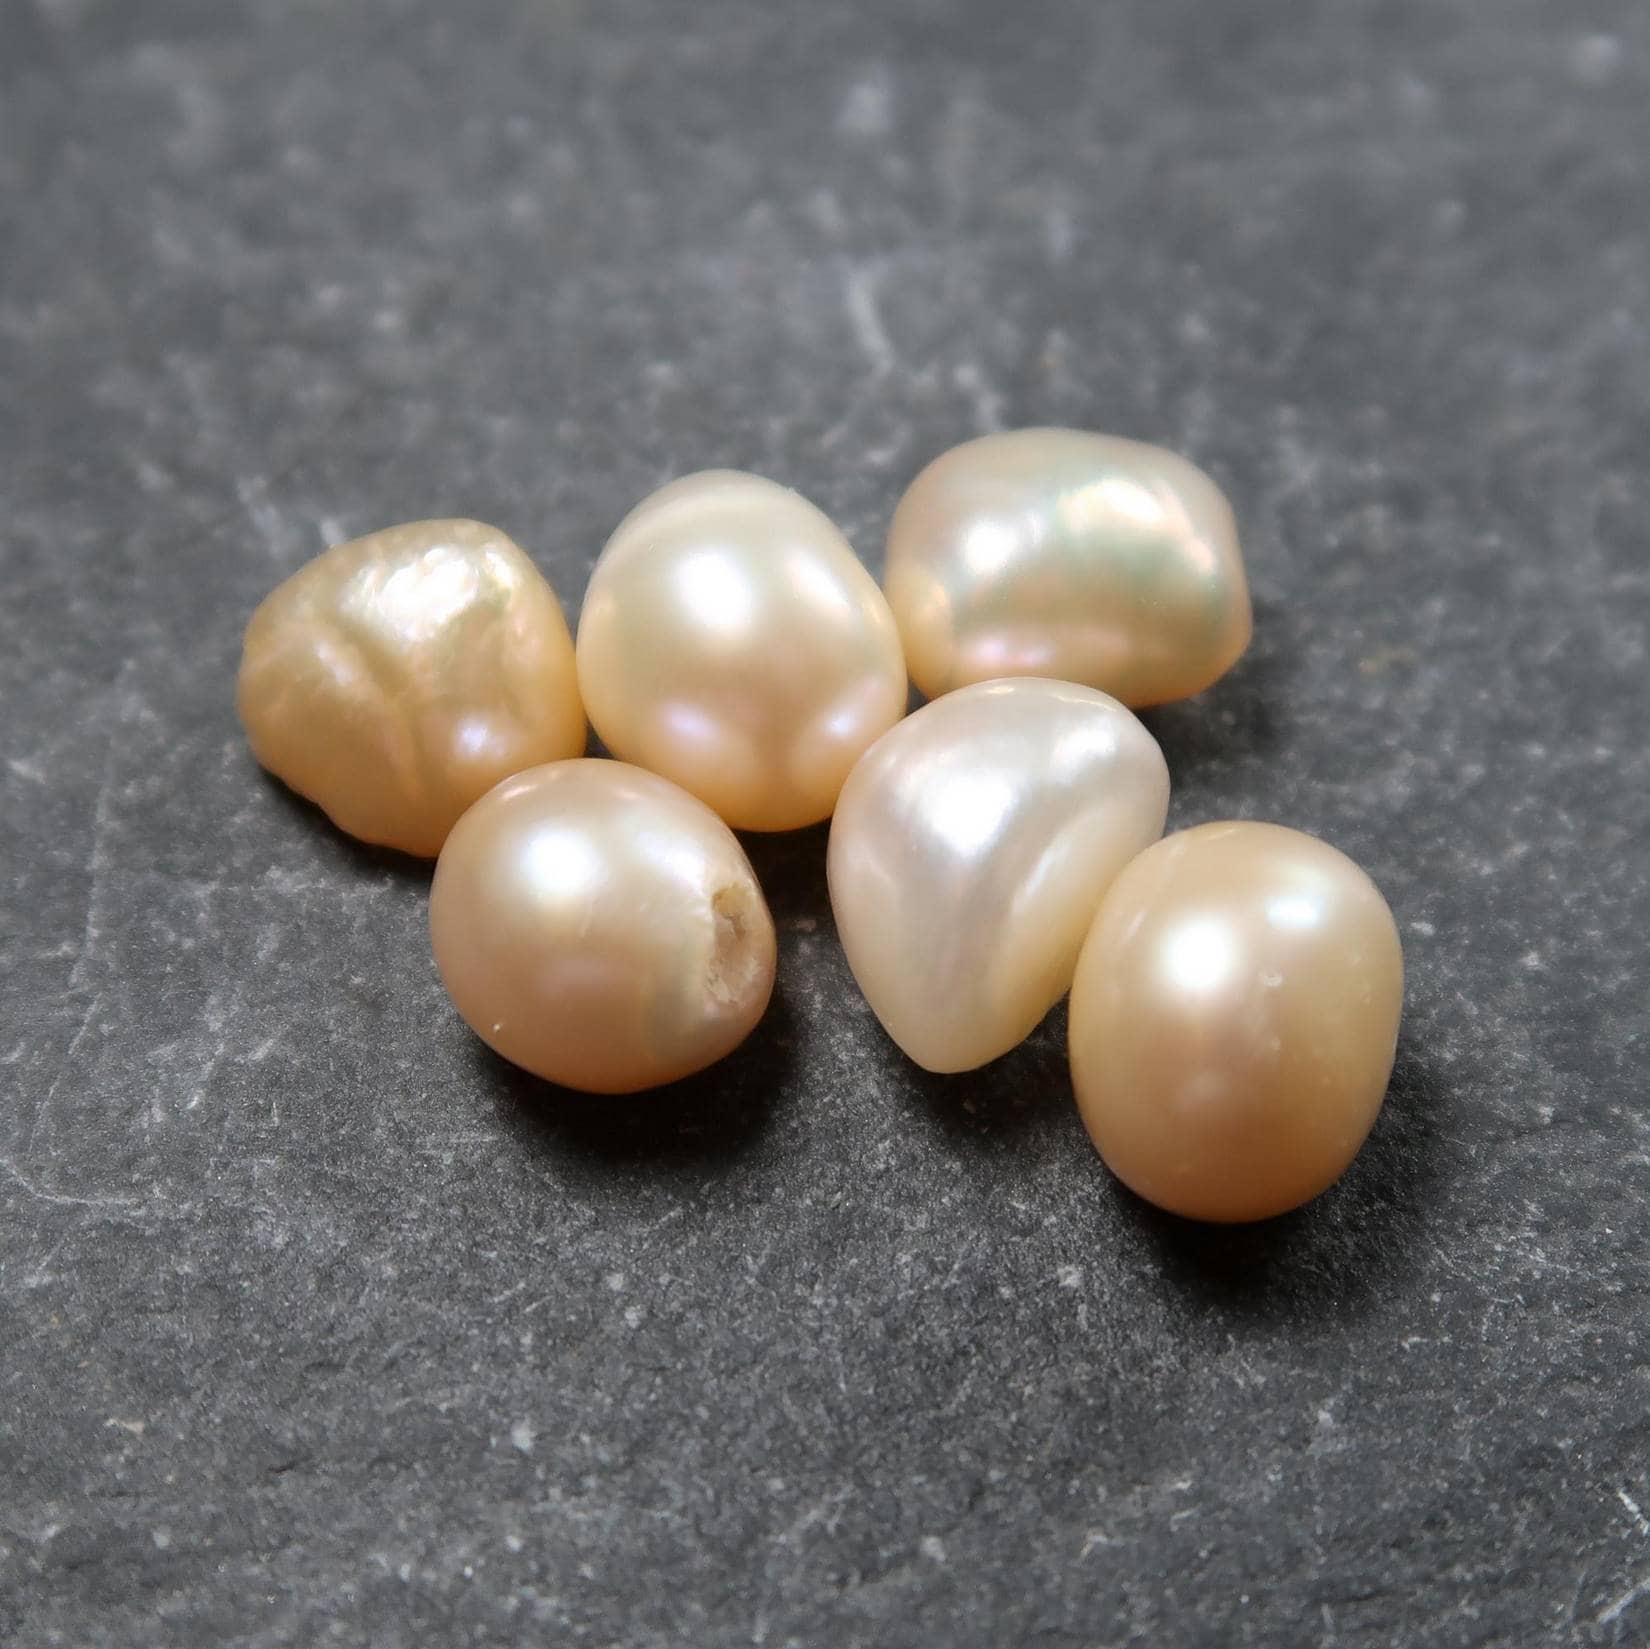 Pearl Specimens | Cultured Pearls for 